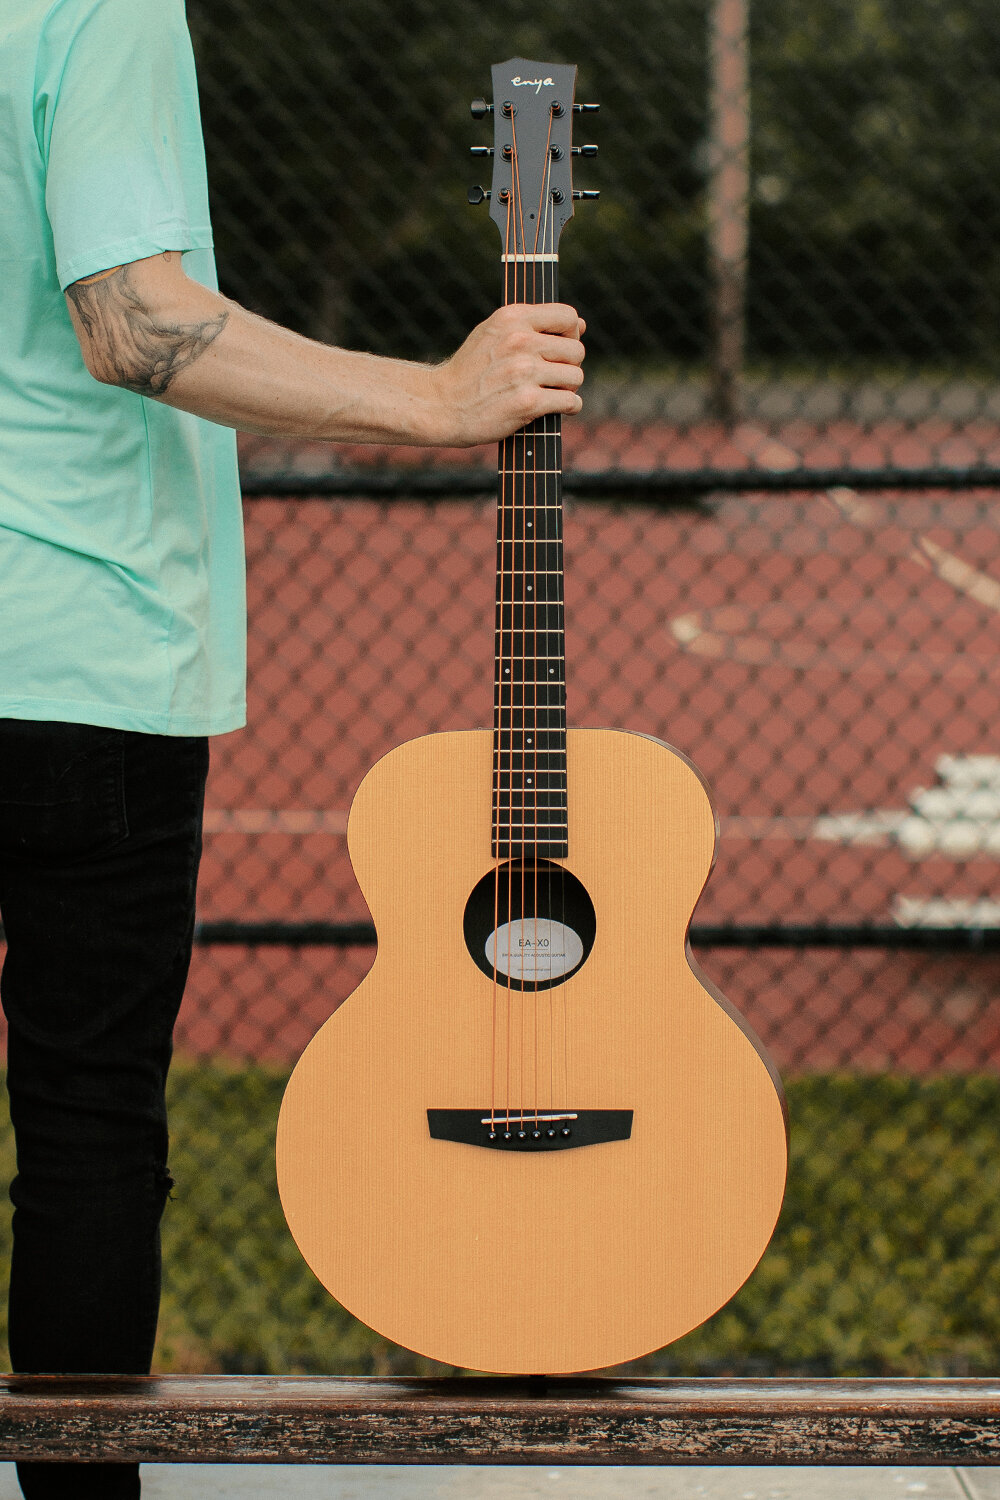 AJ body - The AJ body shape is with high technical difficulty and also high cost, Enya still insists on passing the AJ body to beginners with super cost effective pricing.A better sound experience for beginners who play the guitar for the first time!